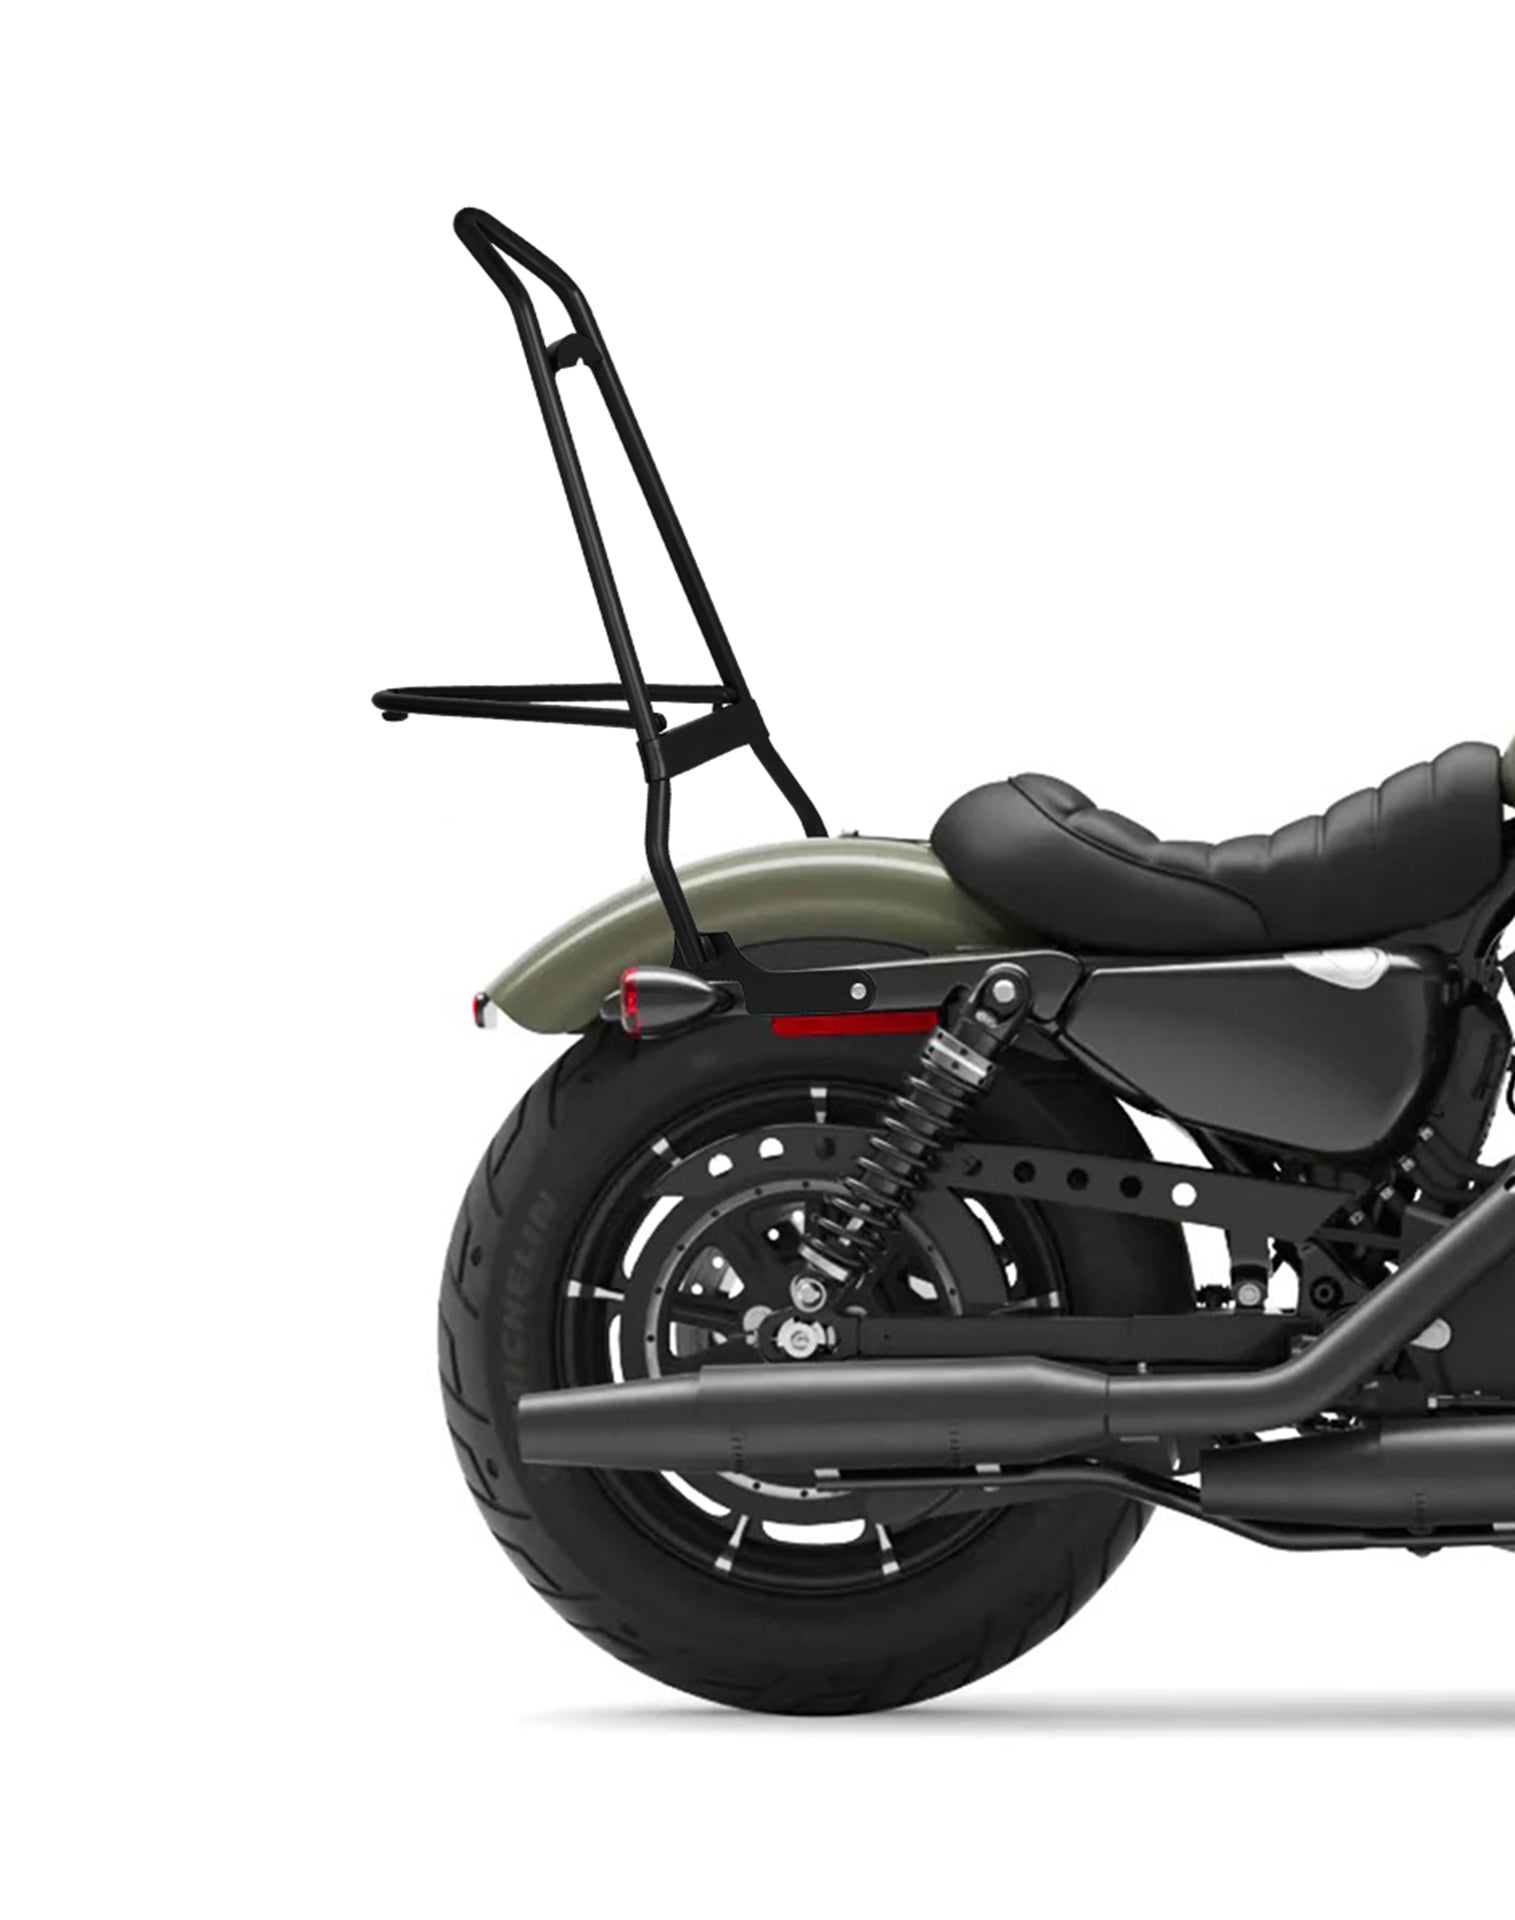 Iron Born Sissy Bar with Foldable Luggage Rack for Harley Sportster 883 Iron XL883N Matte Black Close Up View